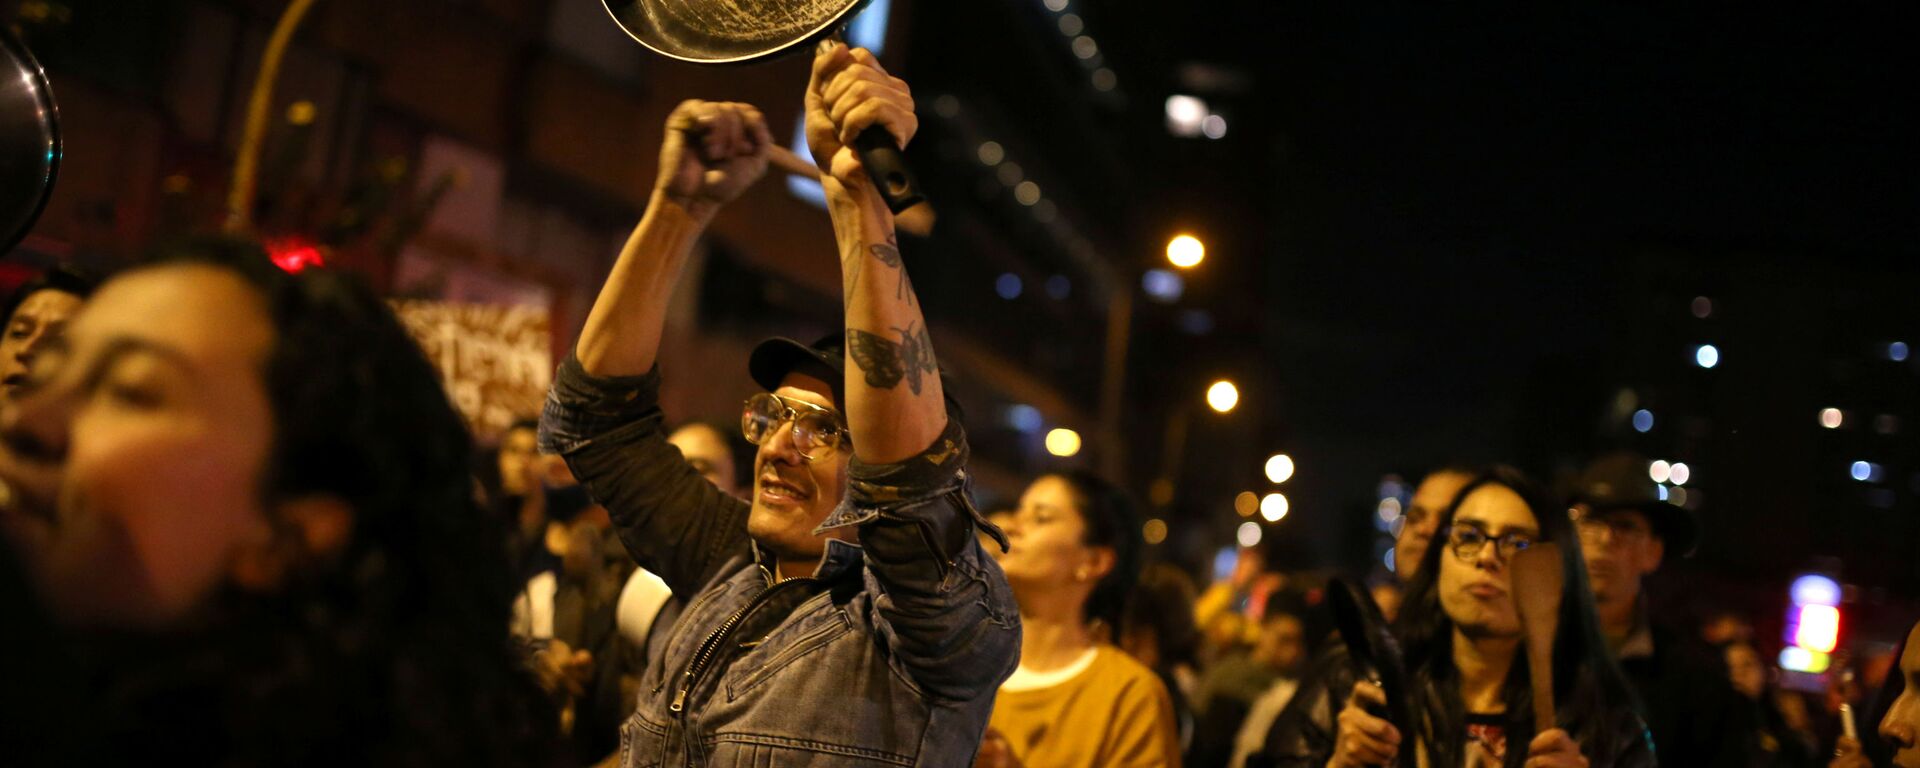 A demonstrator bangs a pan during a protest on the second day of a national strike, in Bogota, Colombia, 22 November 2019.  - Sputnik International, 1920, 03.12.2019